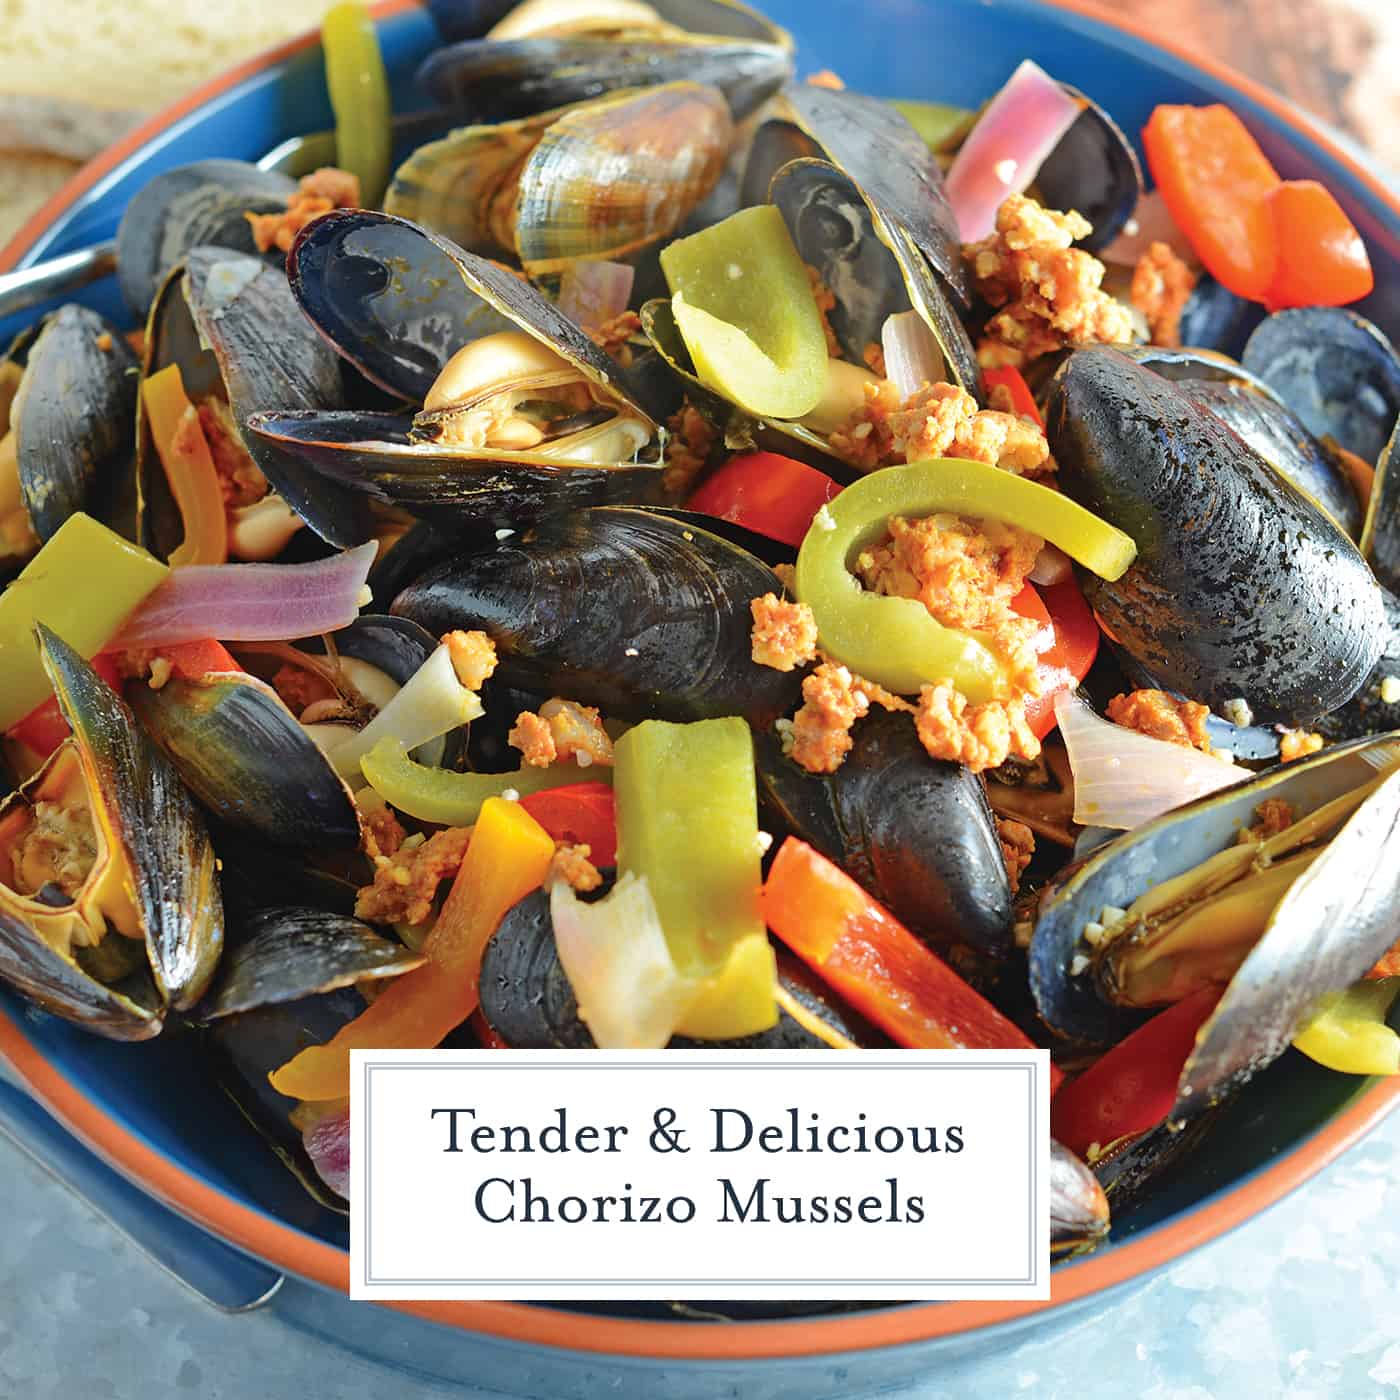 Chorizo Mussels are succulent, luscious tender mussels in a savory butter, chorizo wine sauce. Crusty bread is a must! #steamedmussels #easymusselrecipes #steampot www.savoryexperiments.com 